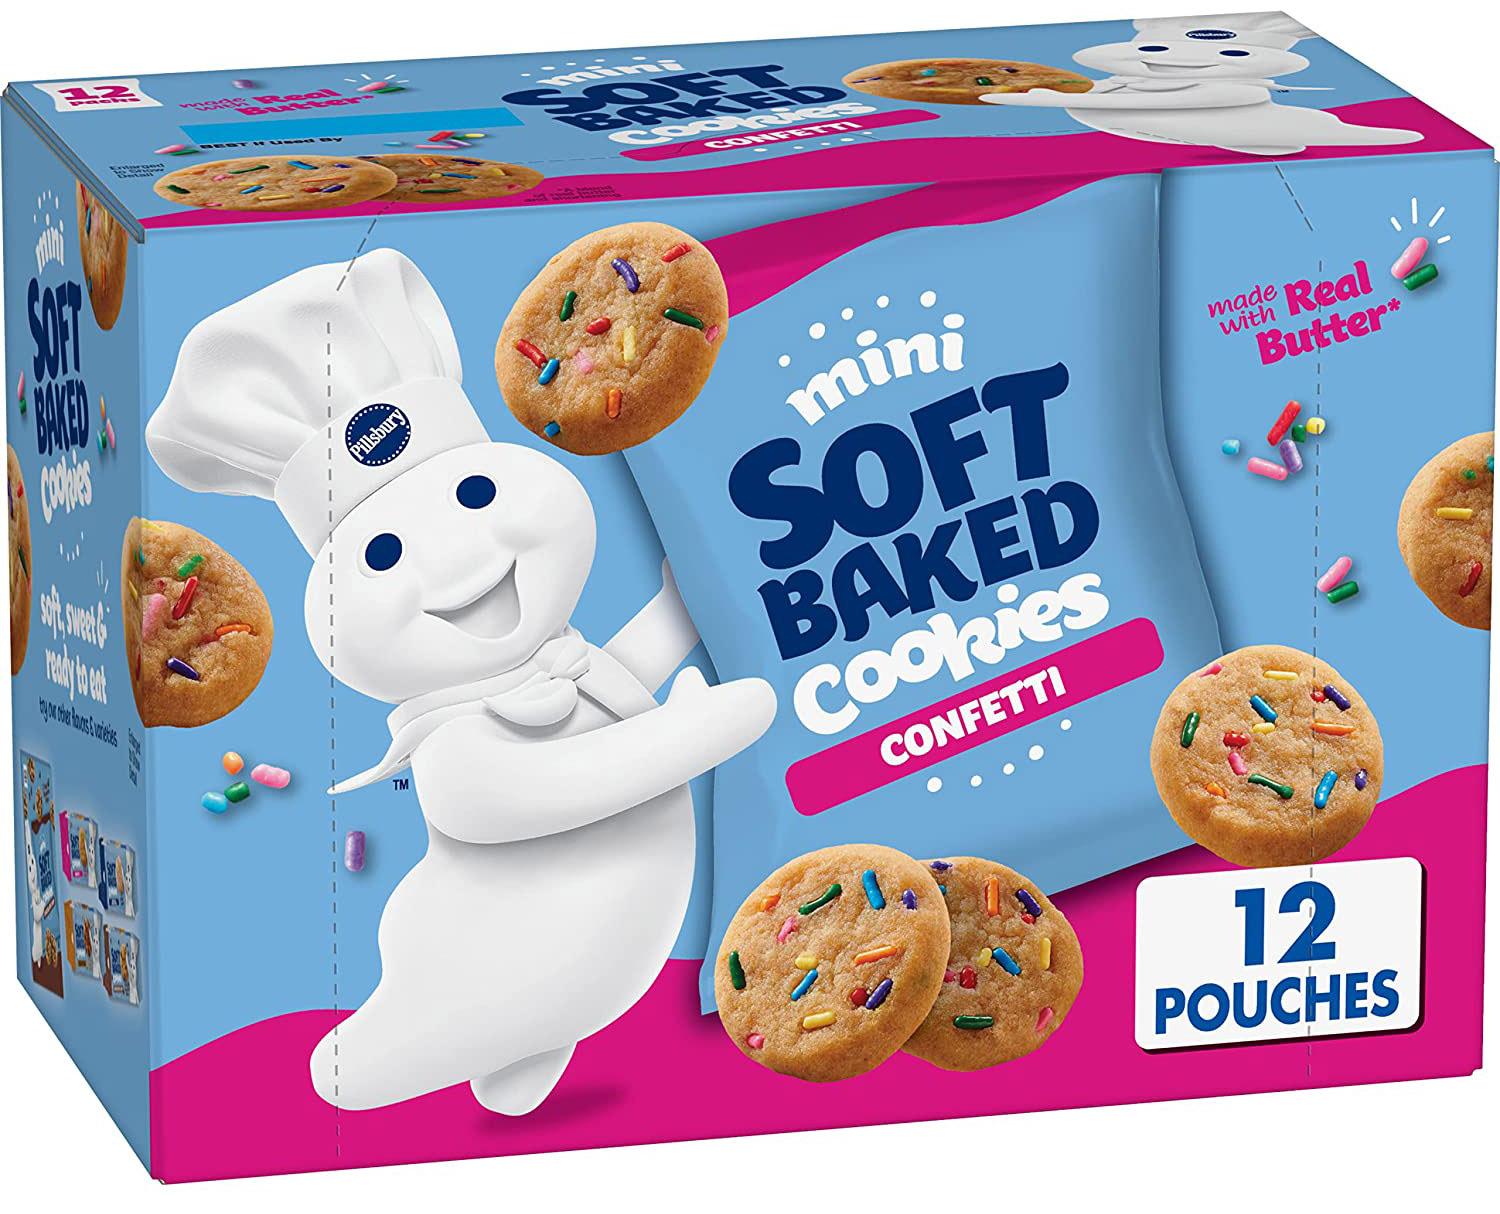 Pillsbury Mini Soft Baked Cookie Snack Bags for $4.22